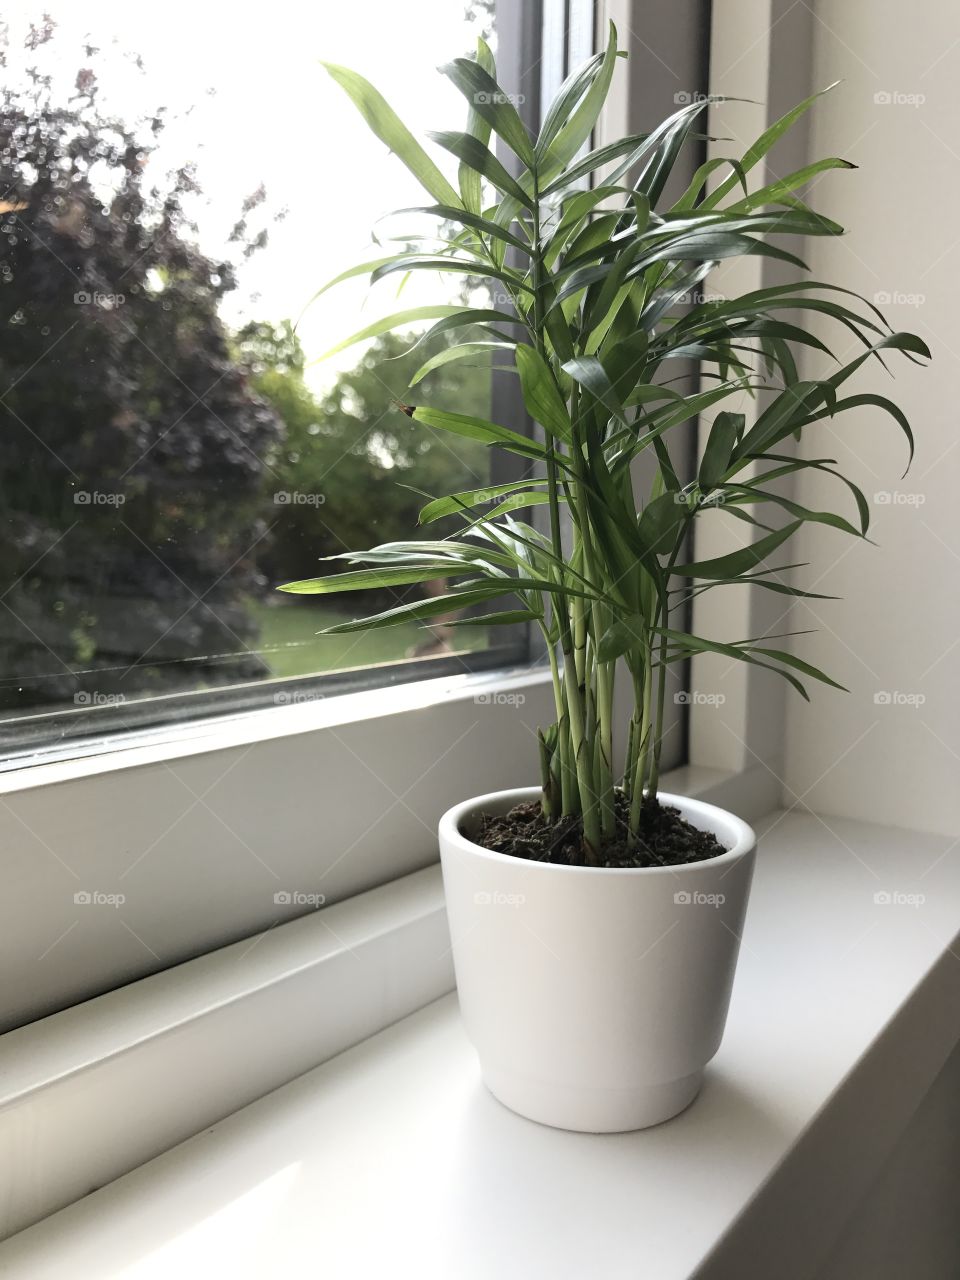 Plant in a pott